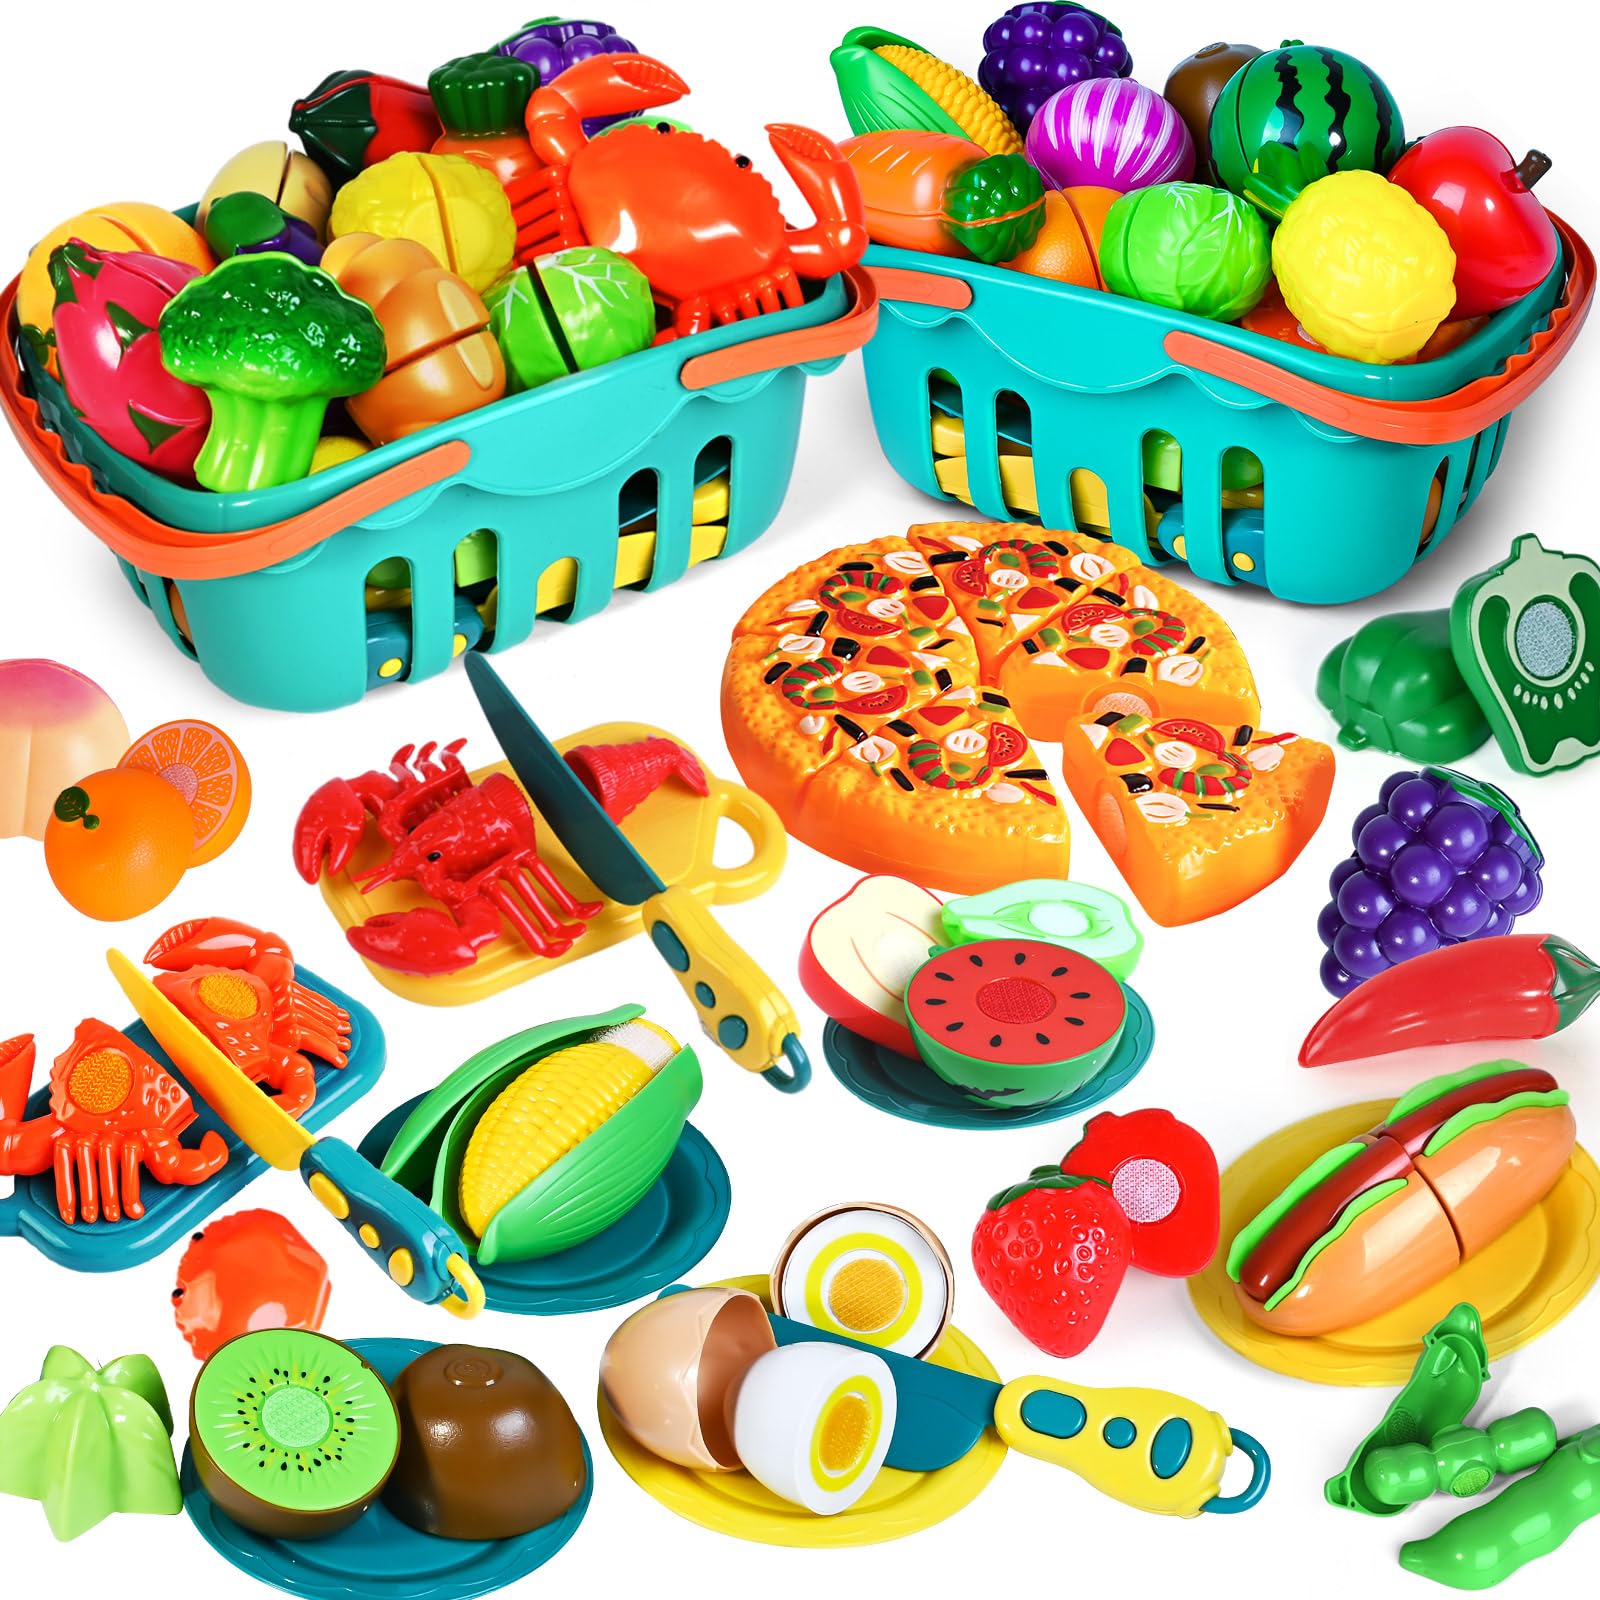 100 PCS Cutting Play Food Toy for Kids Kitchen, Pretend Food Toys for Toddlers, Play Kitchen Toys Accessories with 2 Baskets, Fake Food/Fruit/Vegetable, Birthday Gifts for 2 3 4 5 Years Old Boys Girls